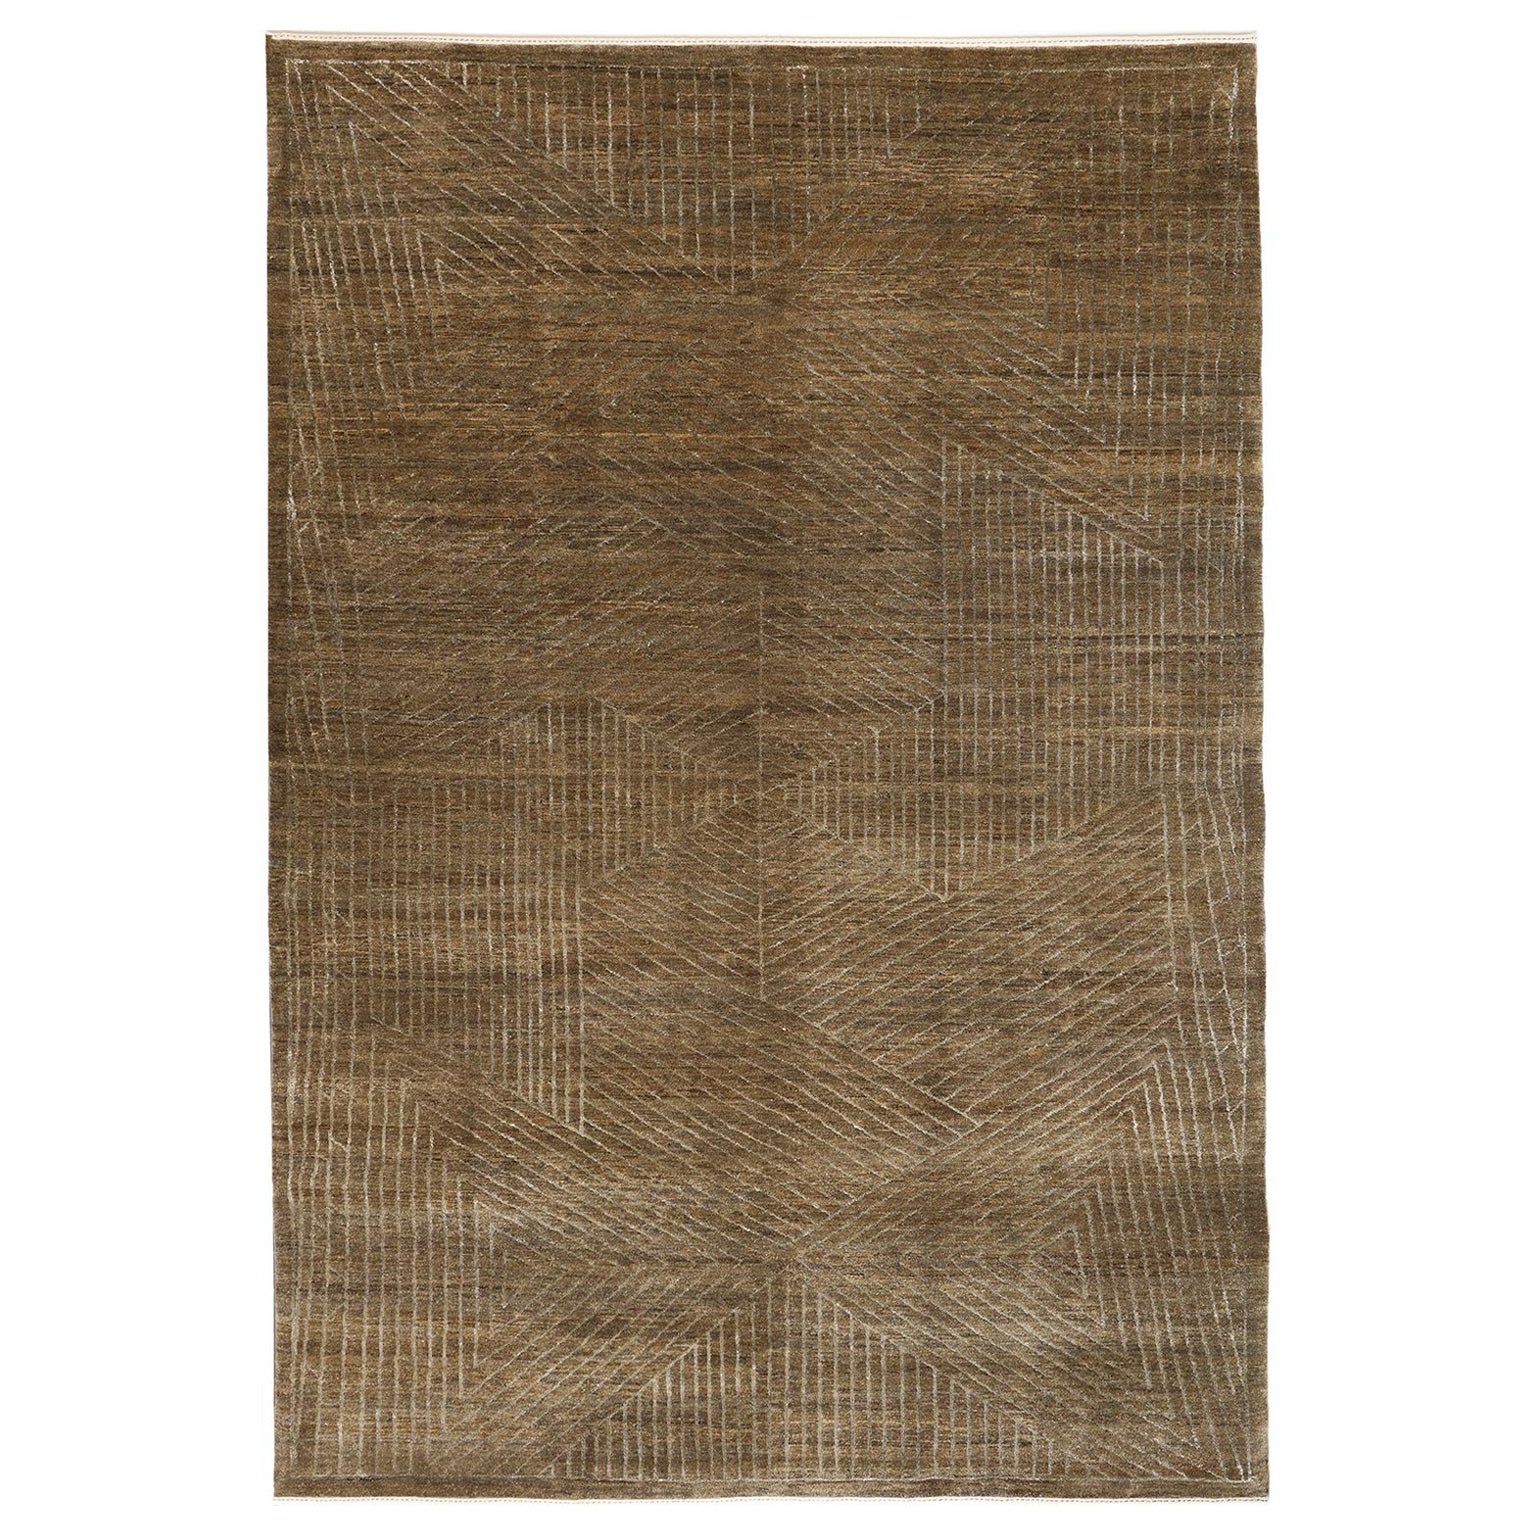 Orley Shabahang "Khesht" Contemporary Persian Rug, Wool and Silk, Brown, 6' x 9' For Sale